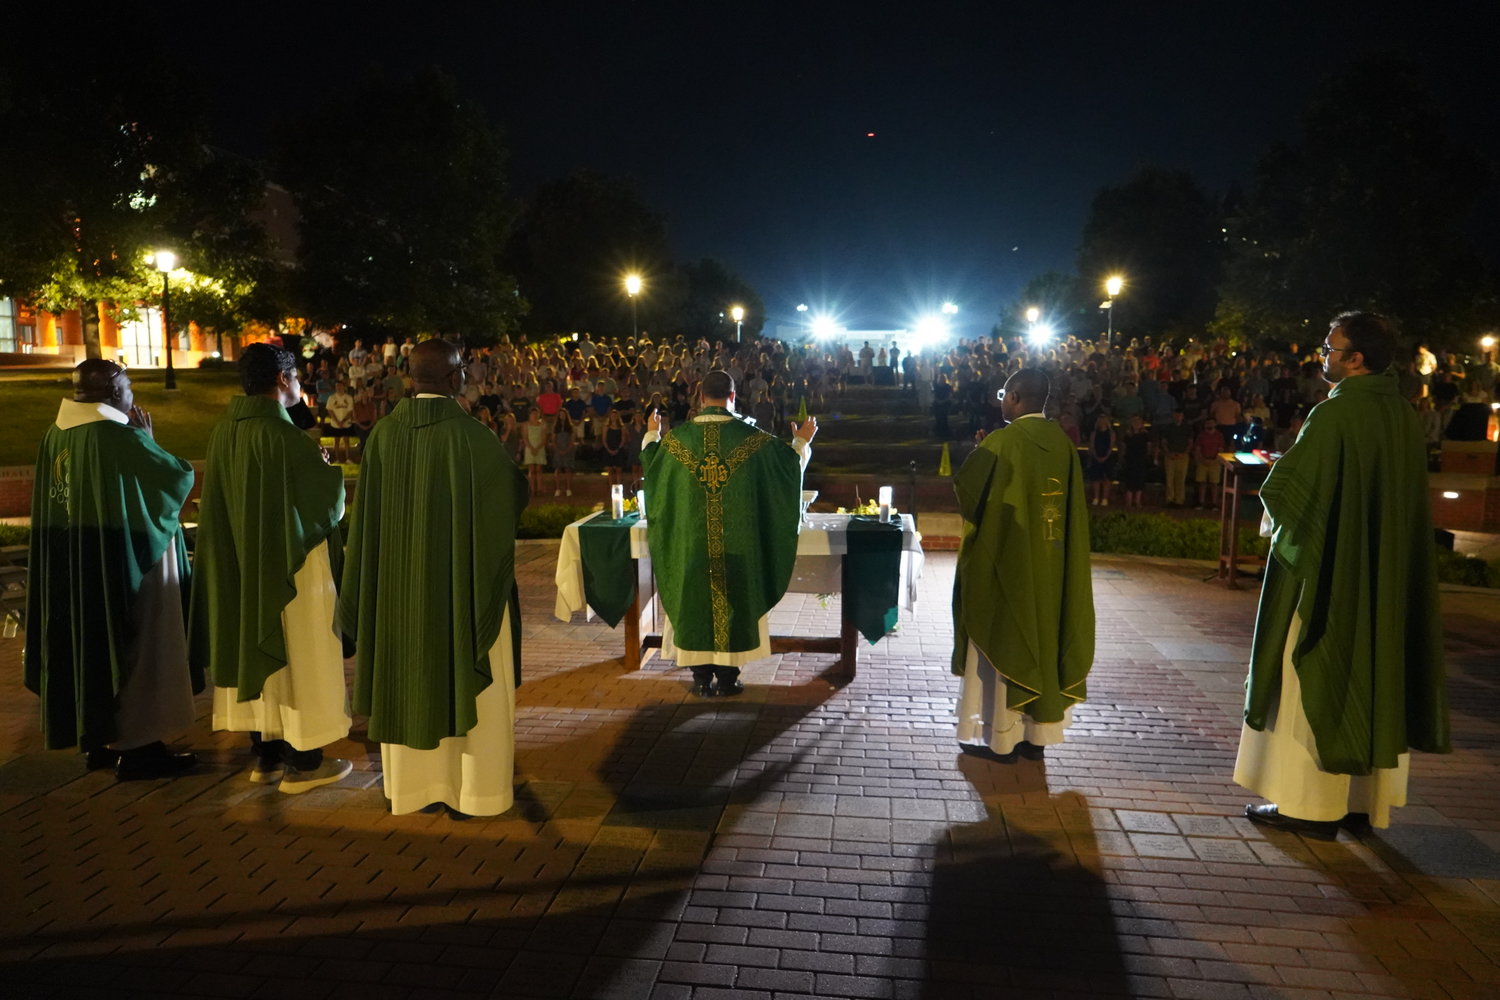 Father Paul Clark and concelebrating priests gather around the altar for the Consecration during this year’s Mass in the Quad on the campus of the University of Missouri in Columbia.